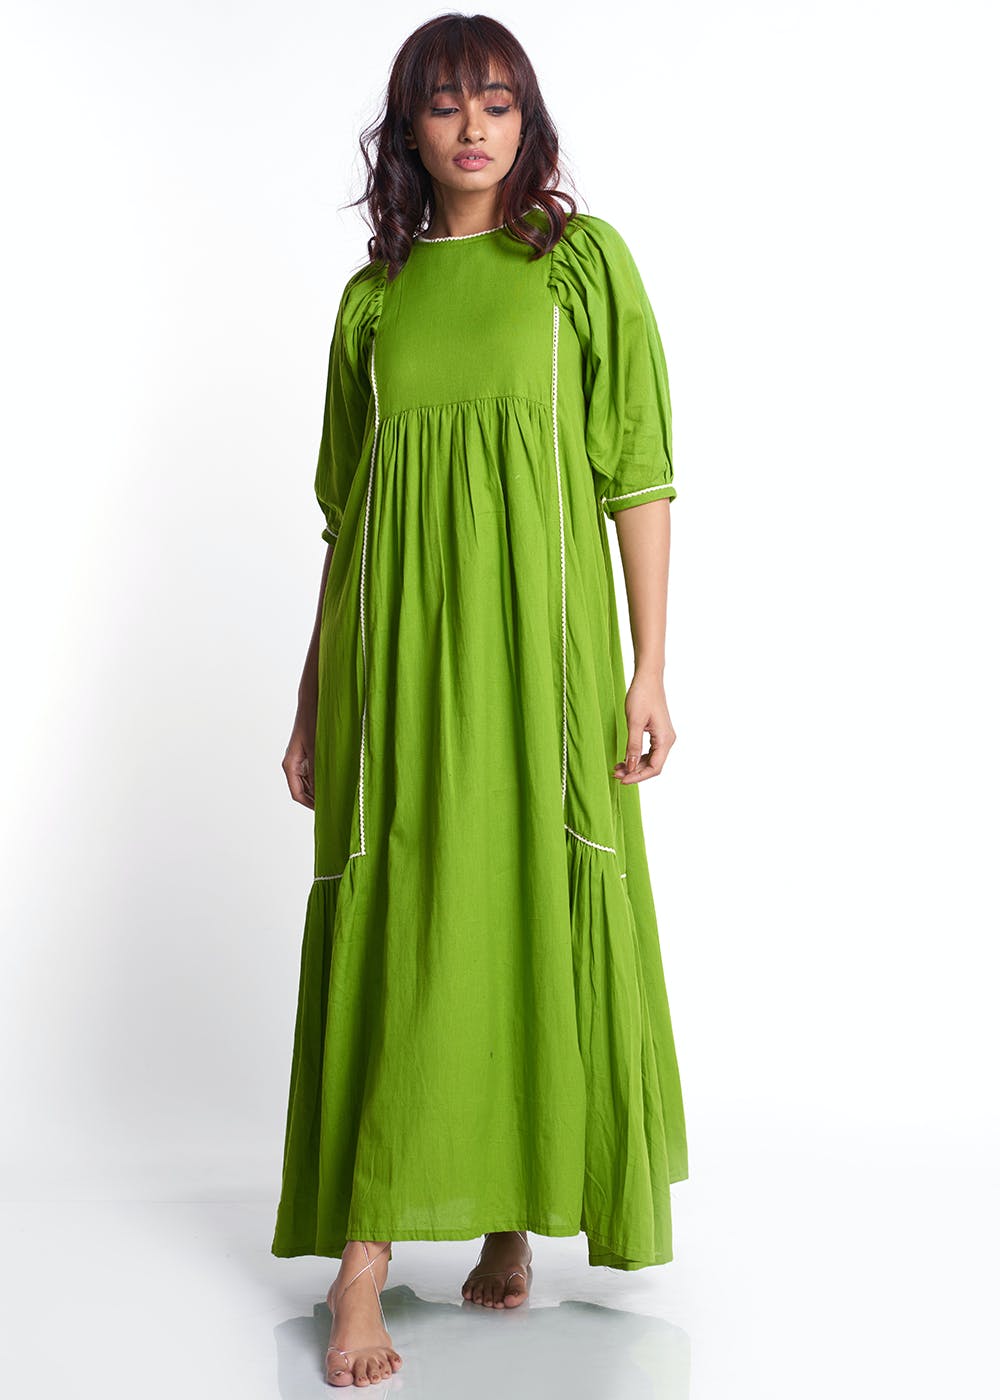 Get Green Balloon Sleeved Cotton One Piece Gown at ₹ 2750 | LBB Shop